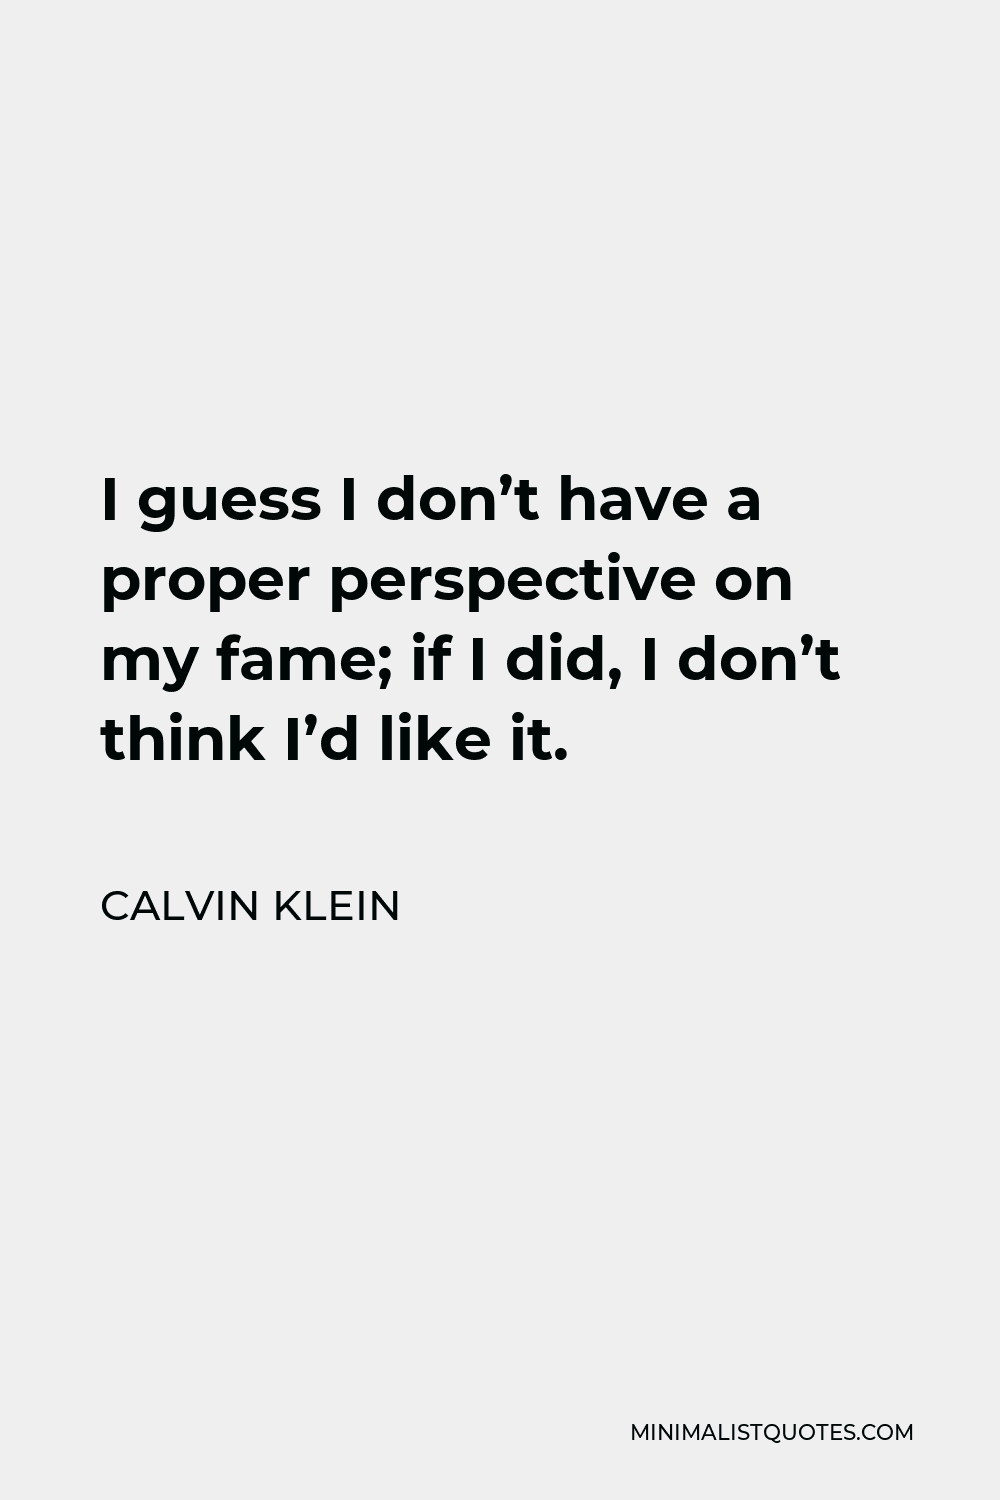 Calvin Klein Quote: I guess I don't have a proper perspective on my fame;  if I did, I don't think I'd like it.